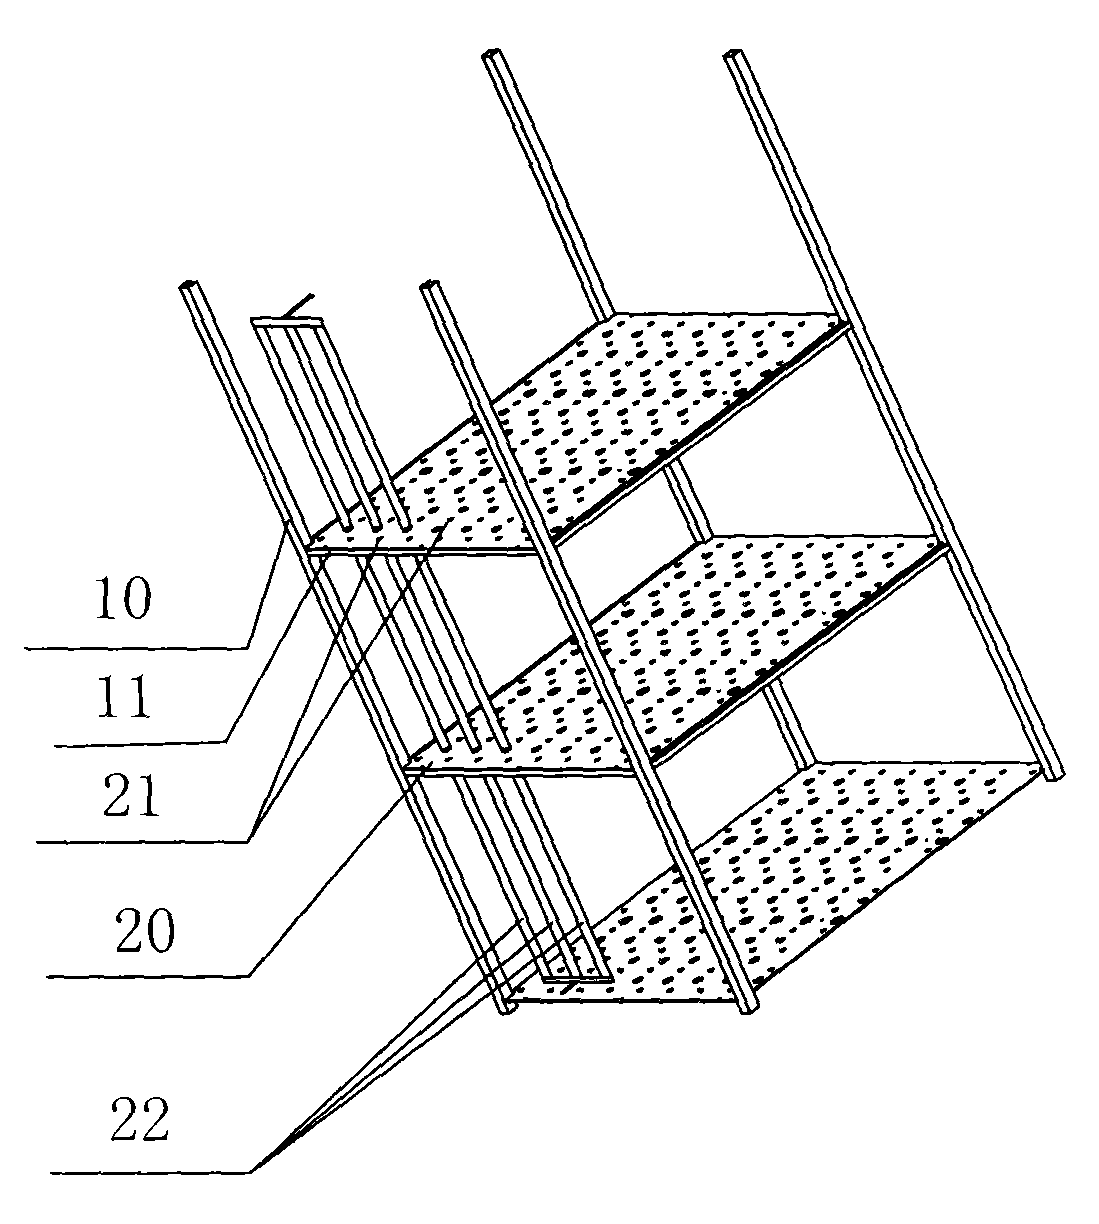 District cooling type ice-storage tank device